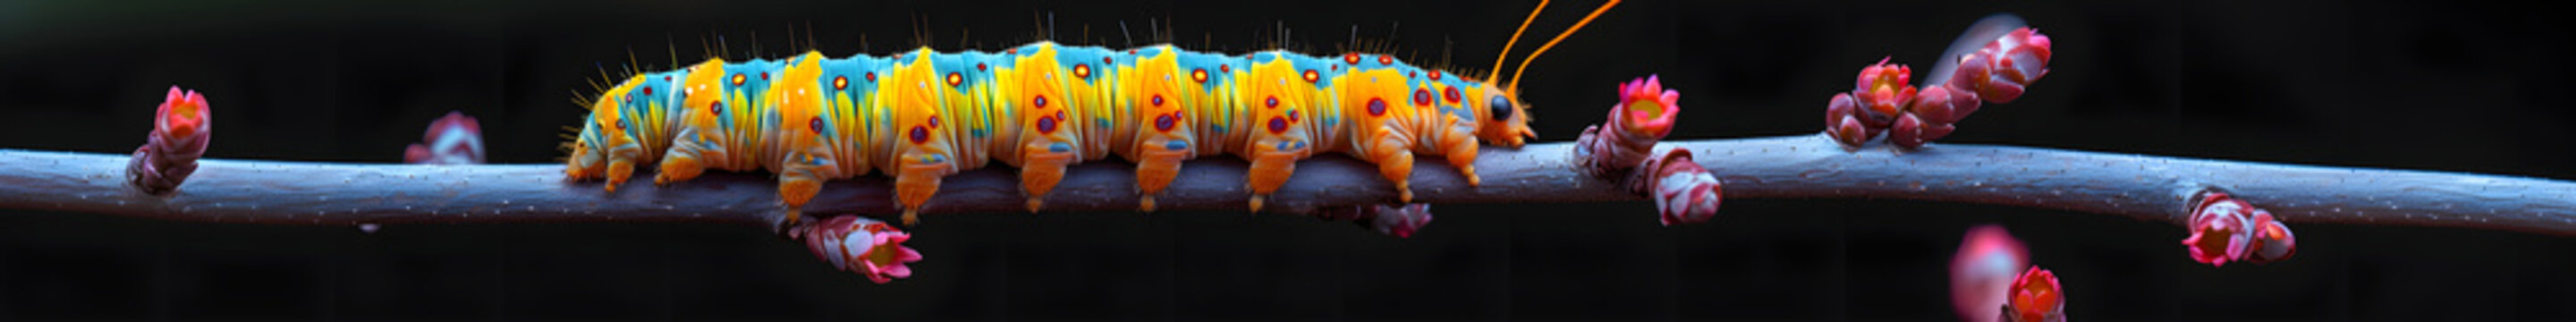 panorama of caterpillar on tree branch with vibrant colors, for web banner with image ratio 8:1